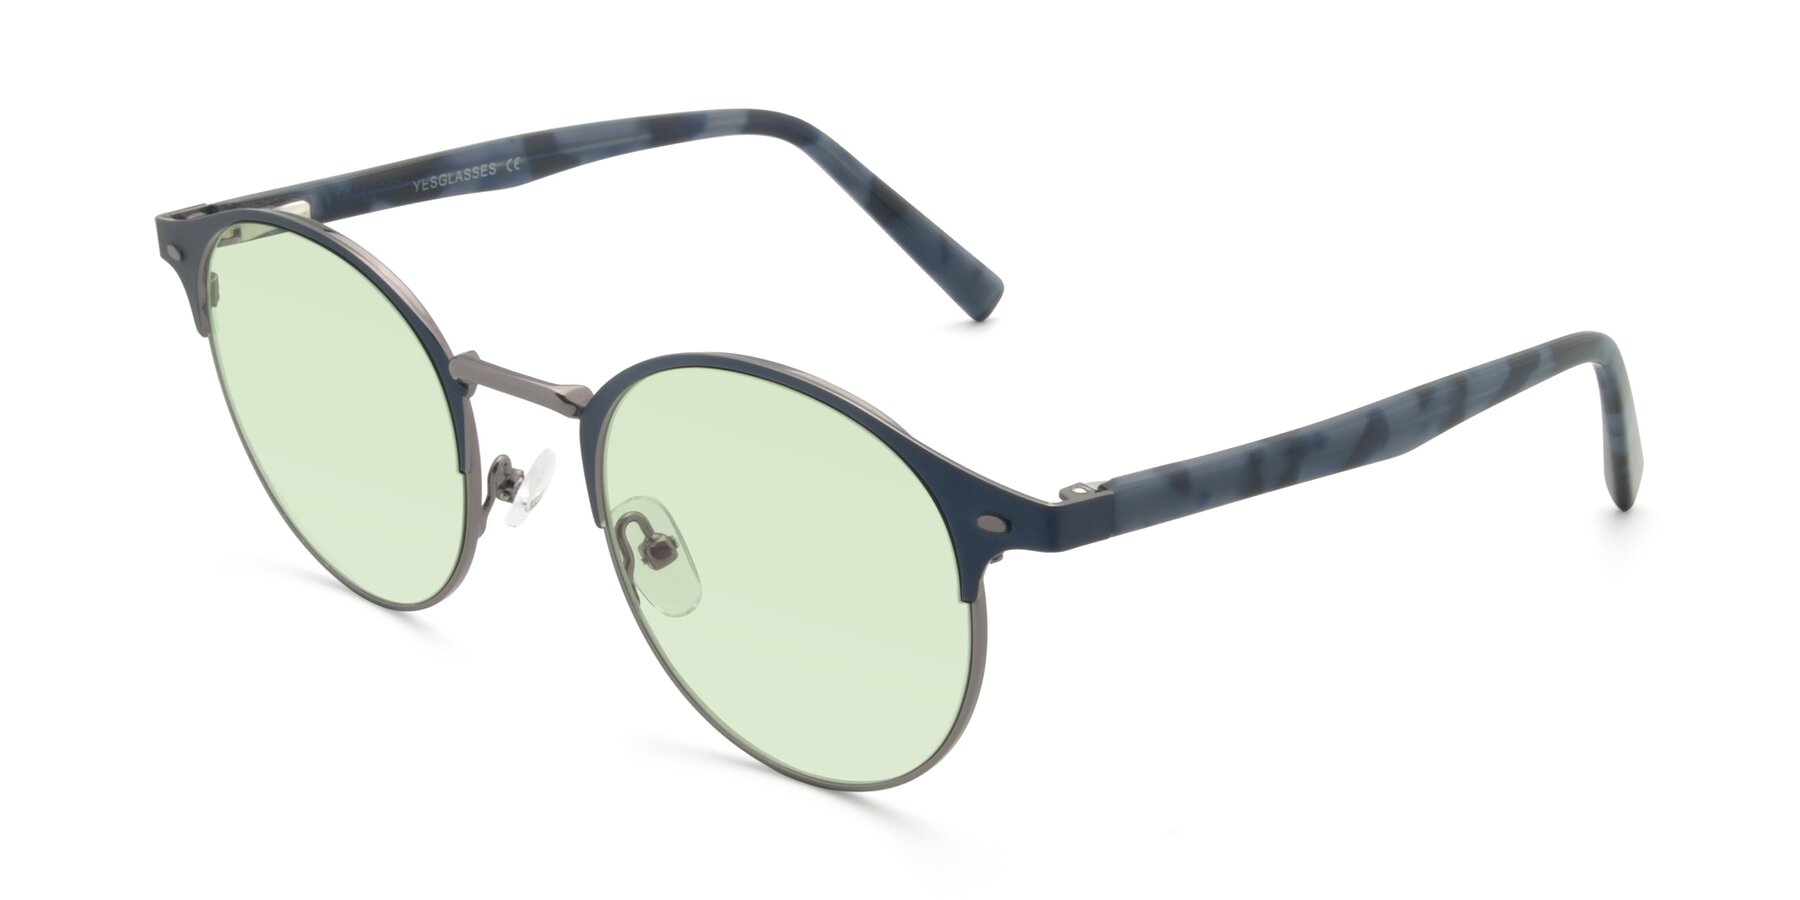 Angle of 9099 in Blue-Gunmetal with Light Green Tinted Lenses